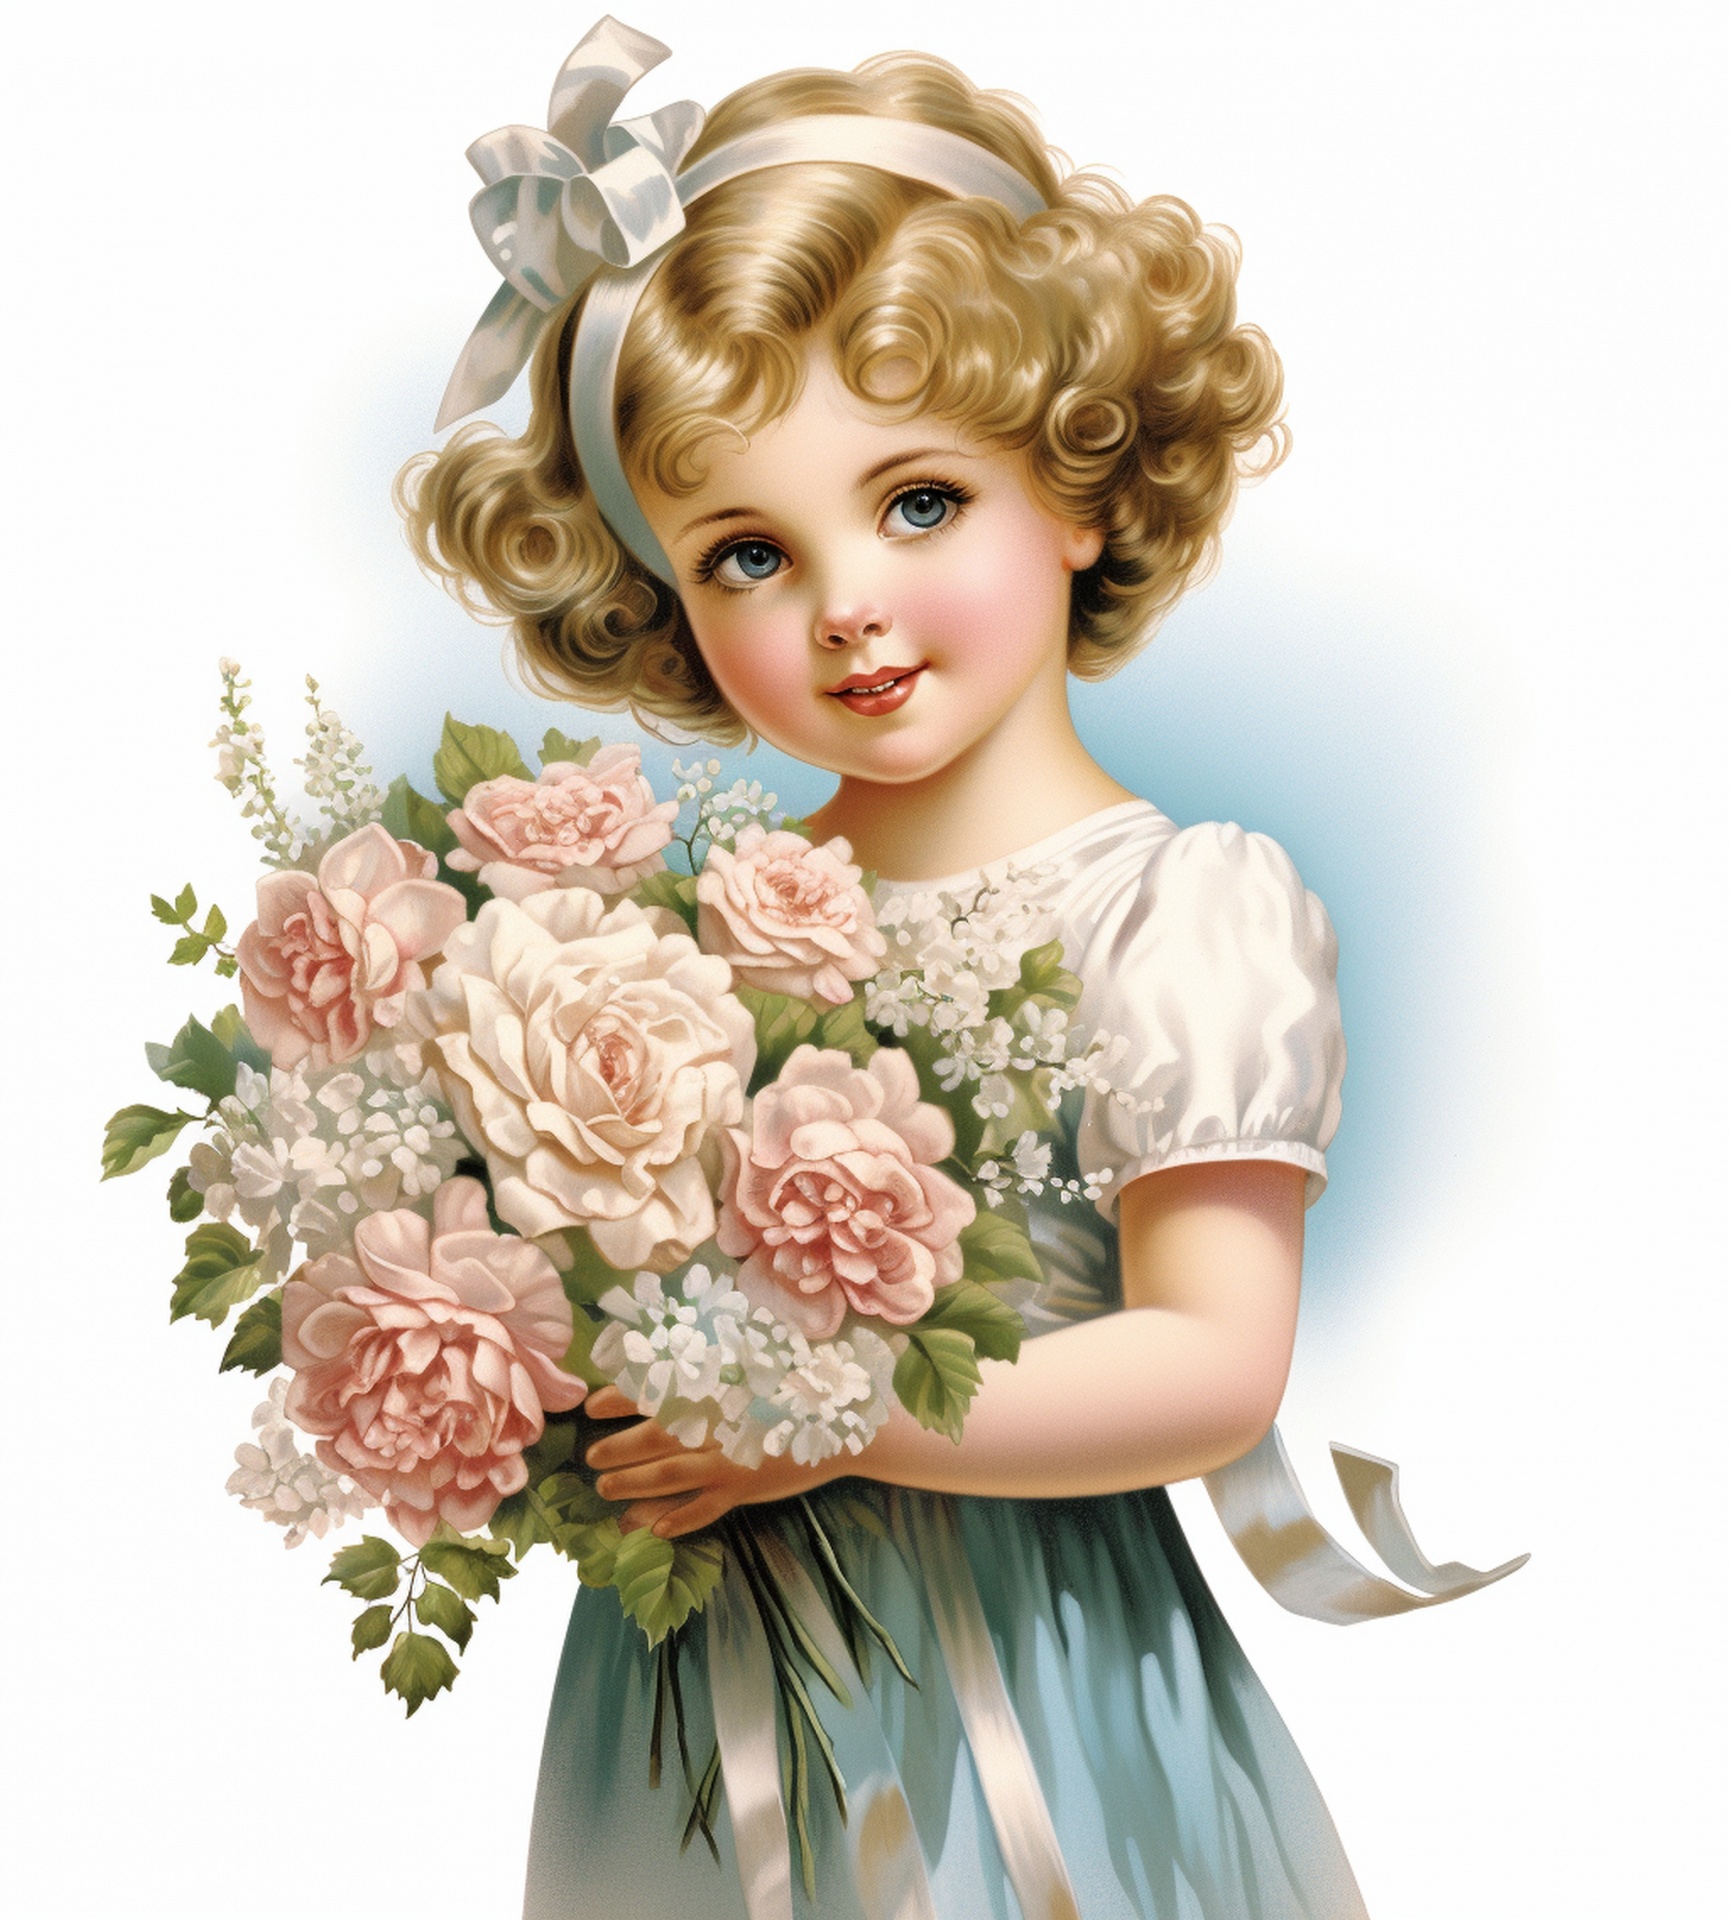 Vintage Flower Girl Free Stock Photo - Public Domain Pictures